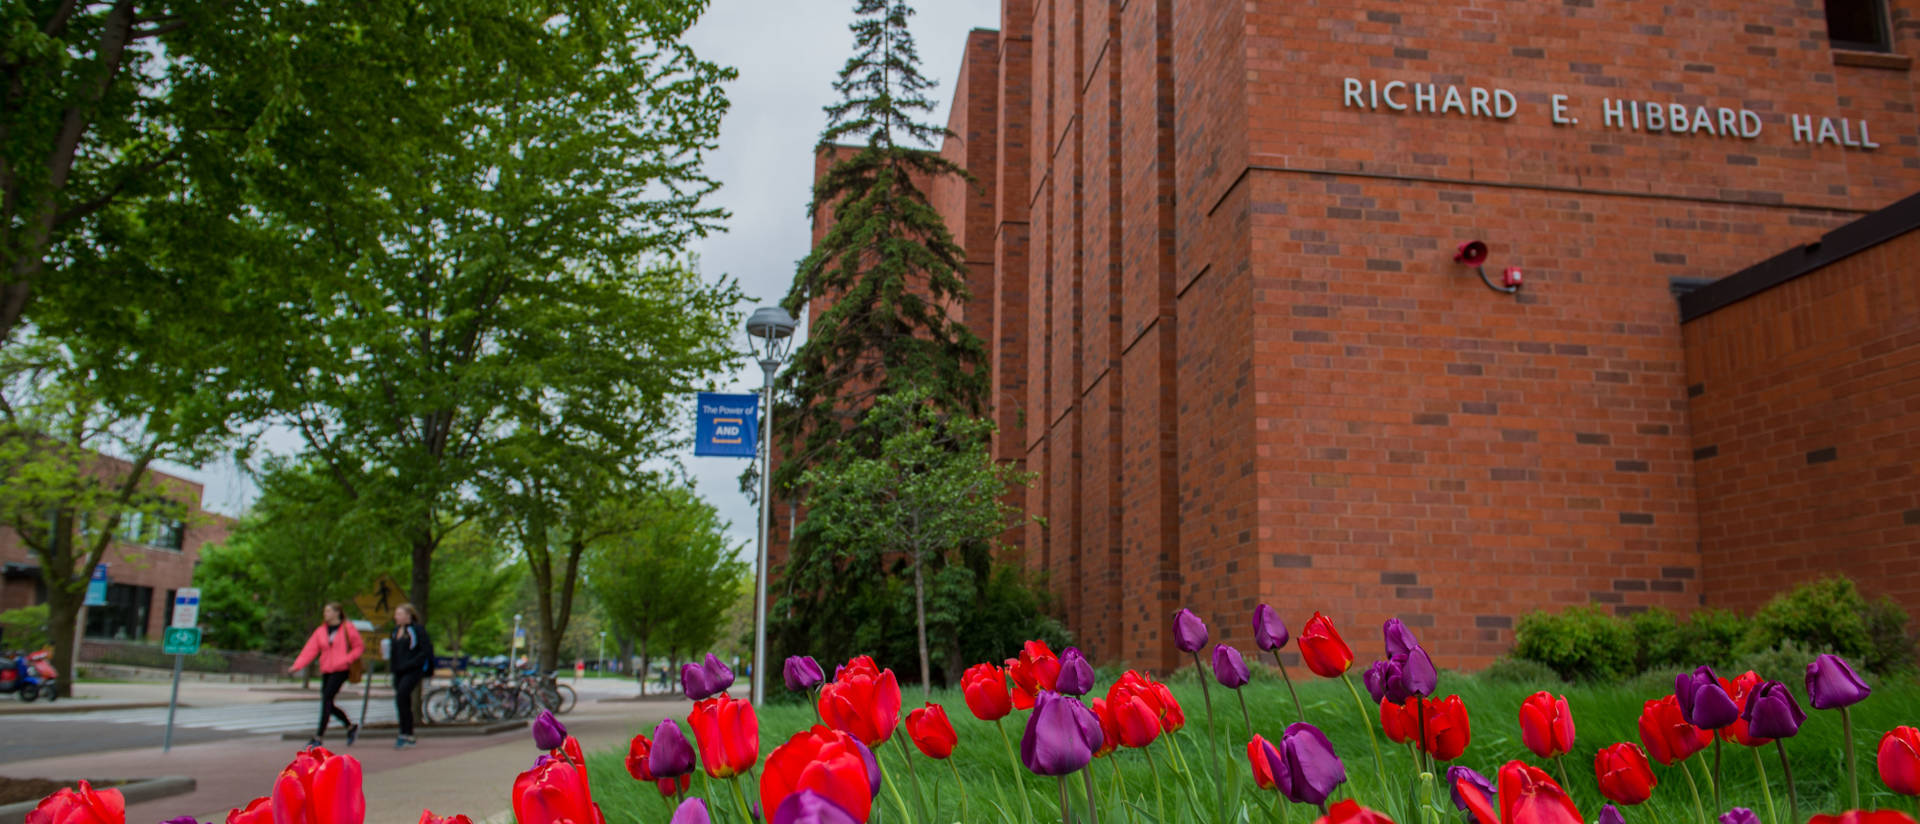 Hibbard Hall on a spring day with tulips blooming.